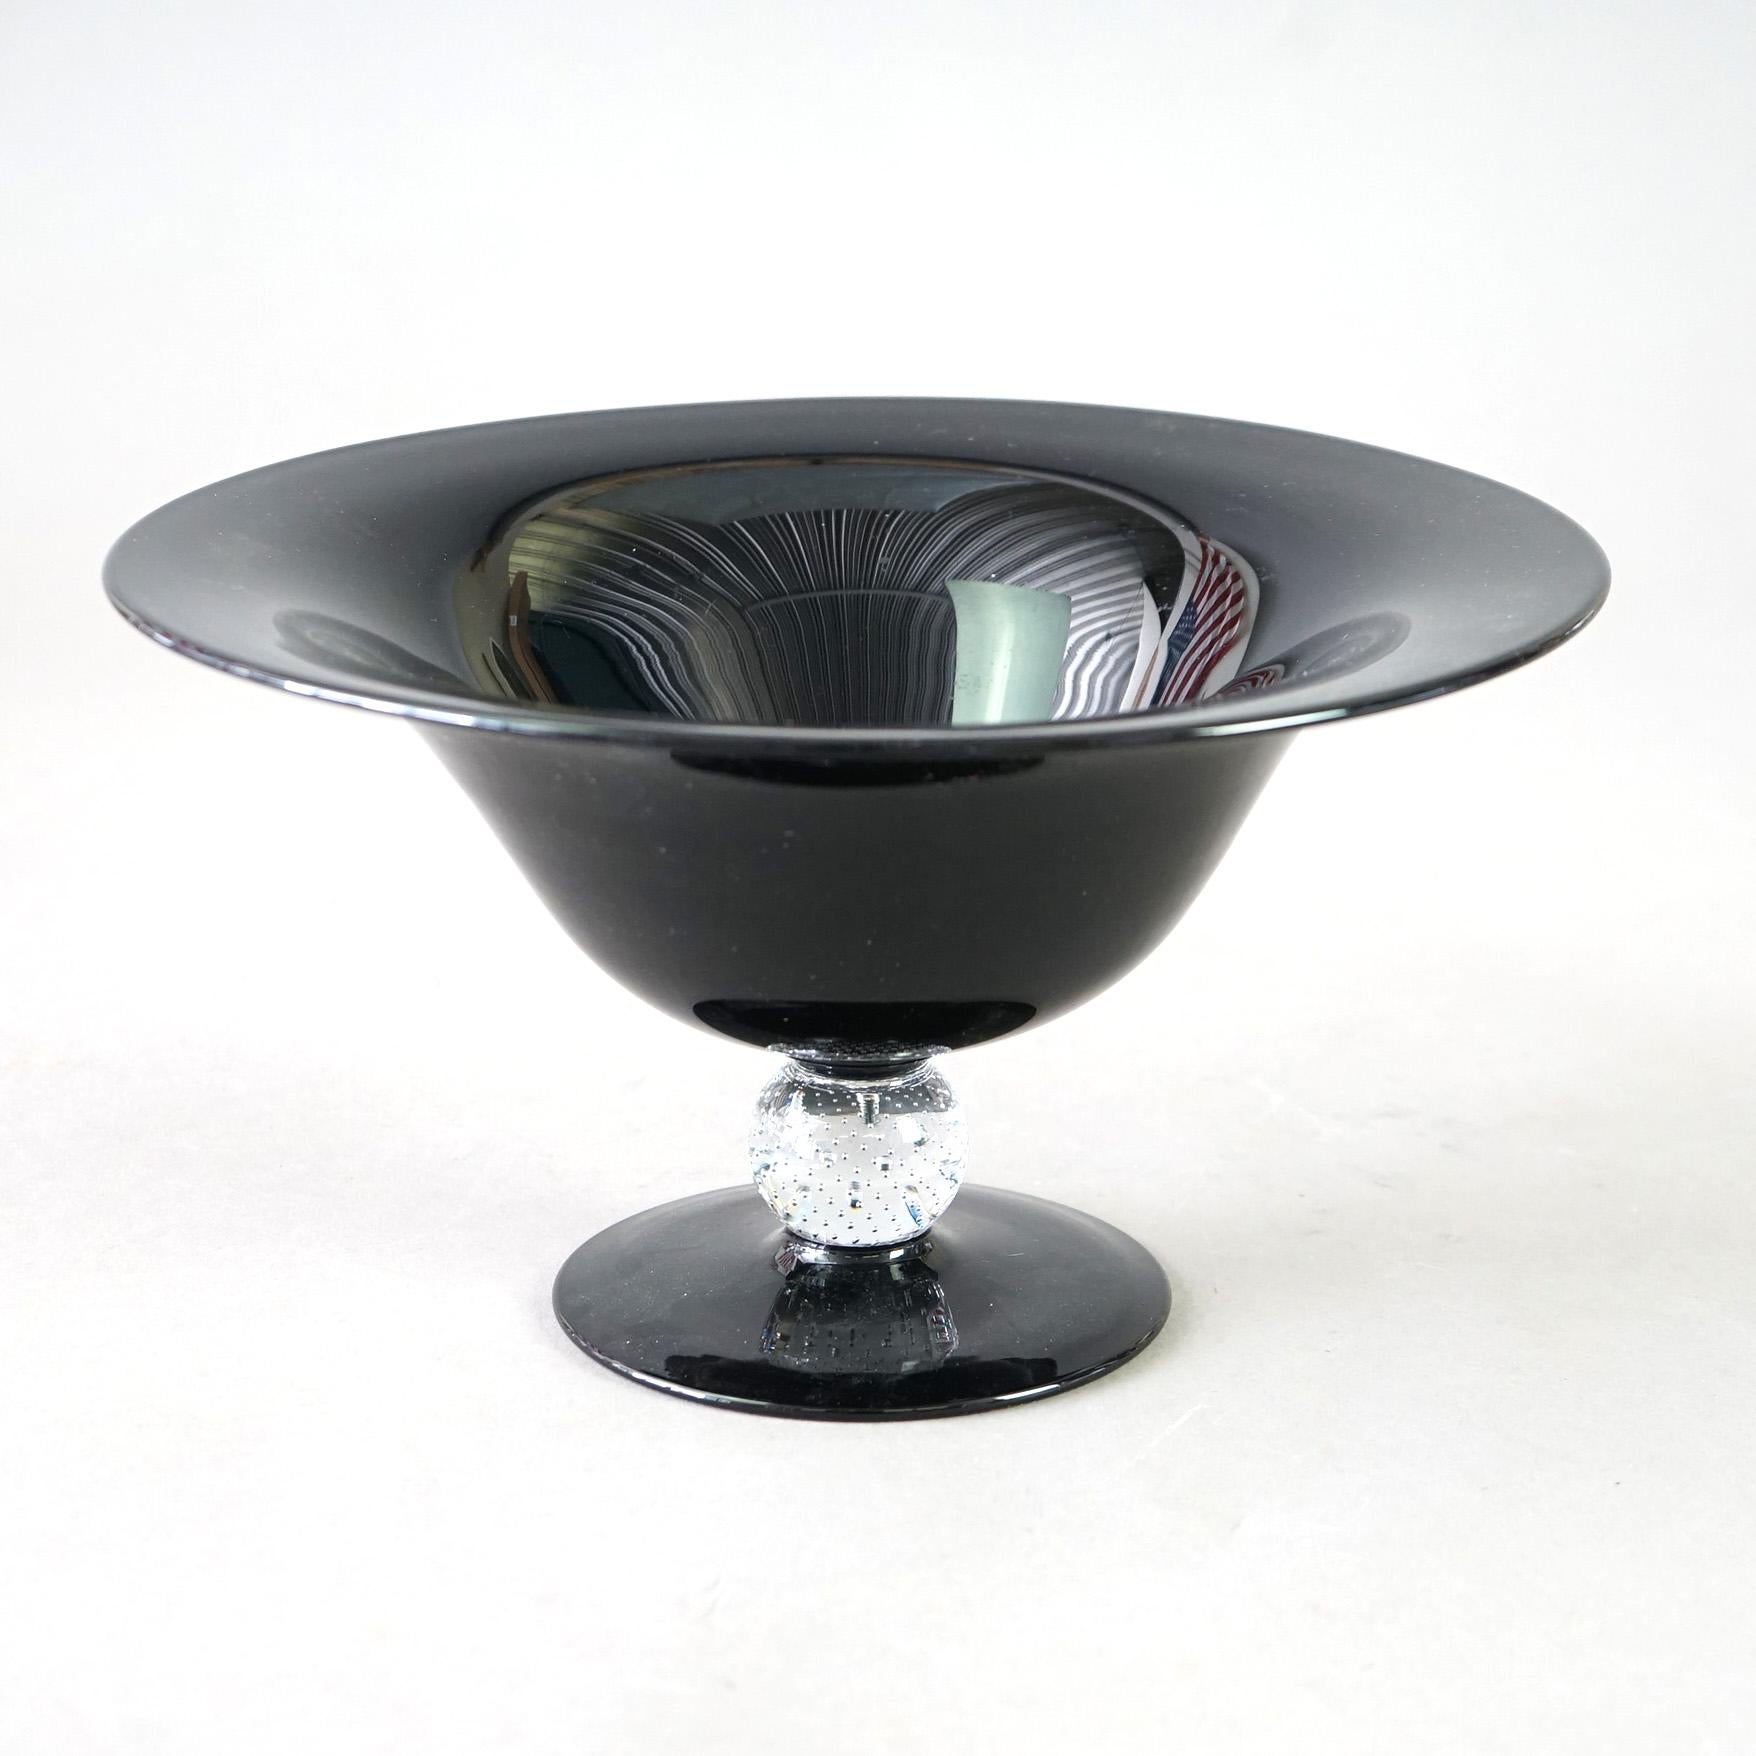 An antique compote in the manner of Pairpoint offers black amethyst art glass construction in flared form with colorless controlled bubble glass ball column, c1920

Measures - 6.75